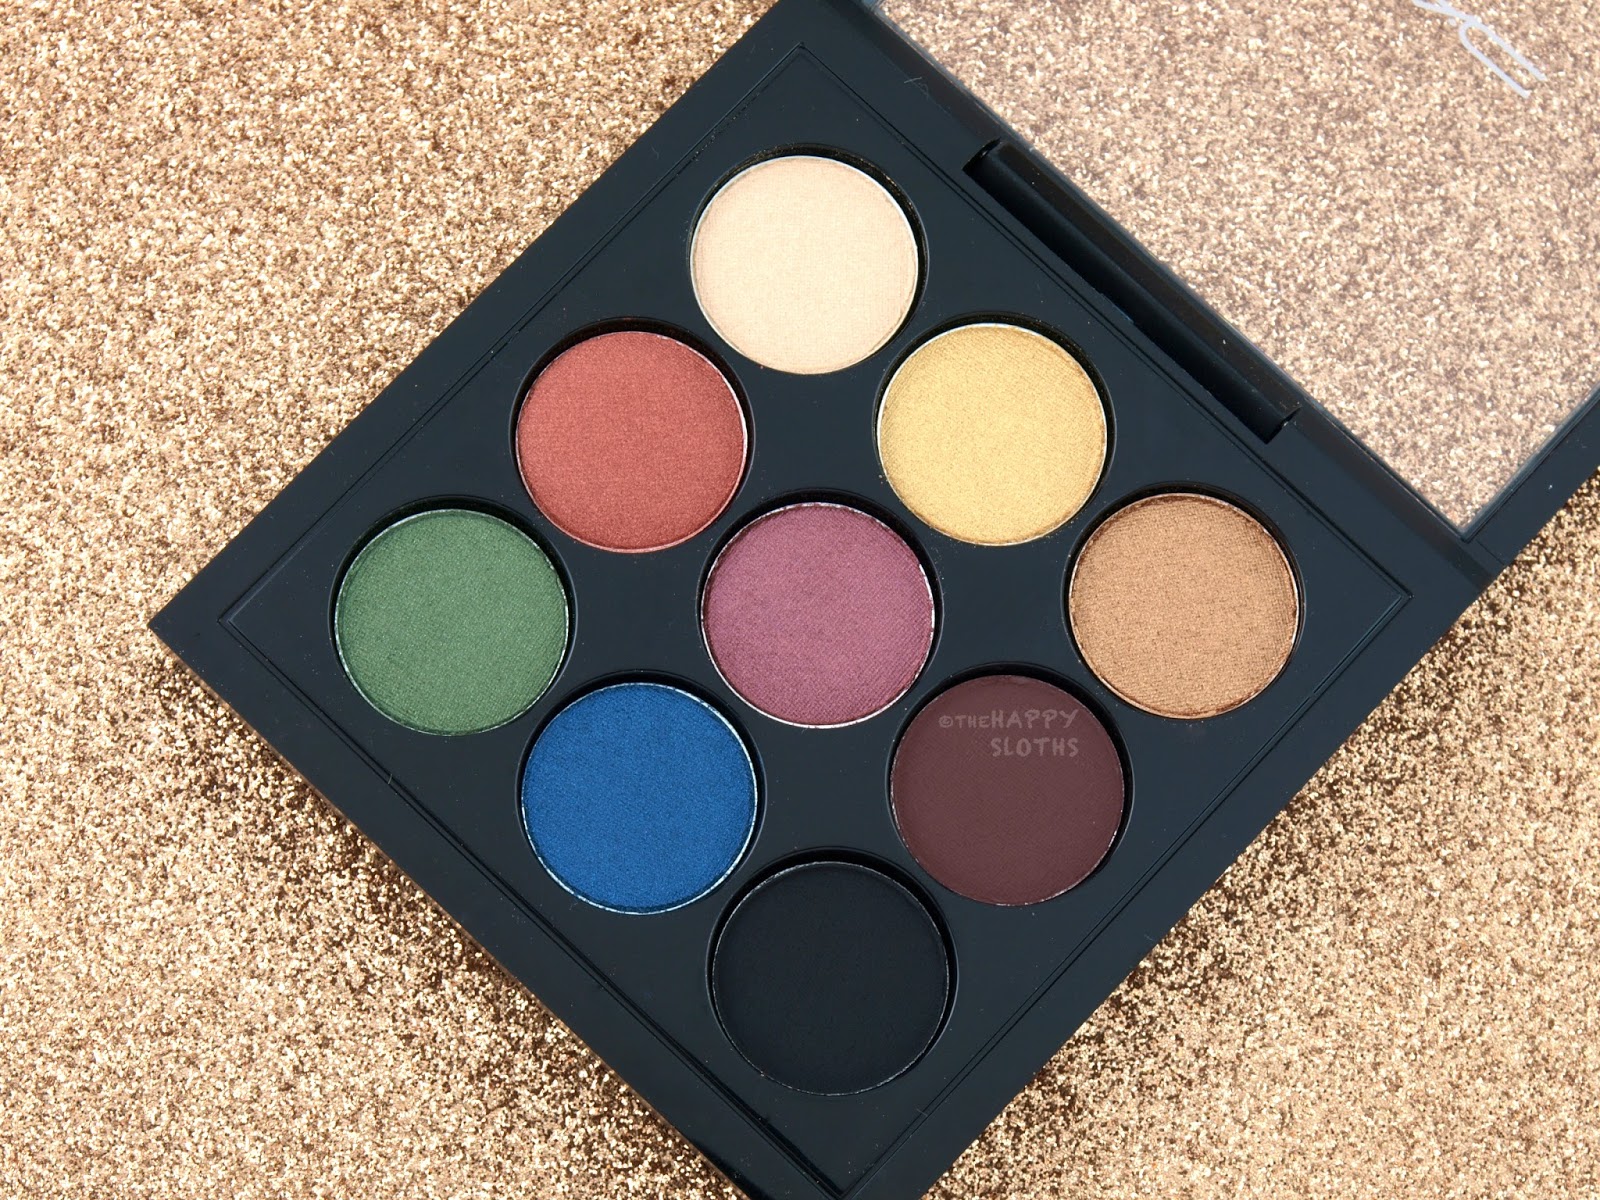 MAC Light Festival Eyeshadow X 9 Palette Review and Swatches